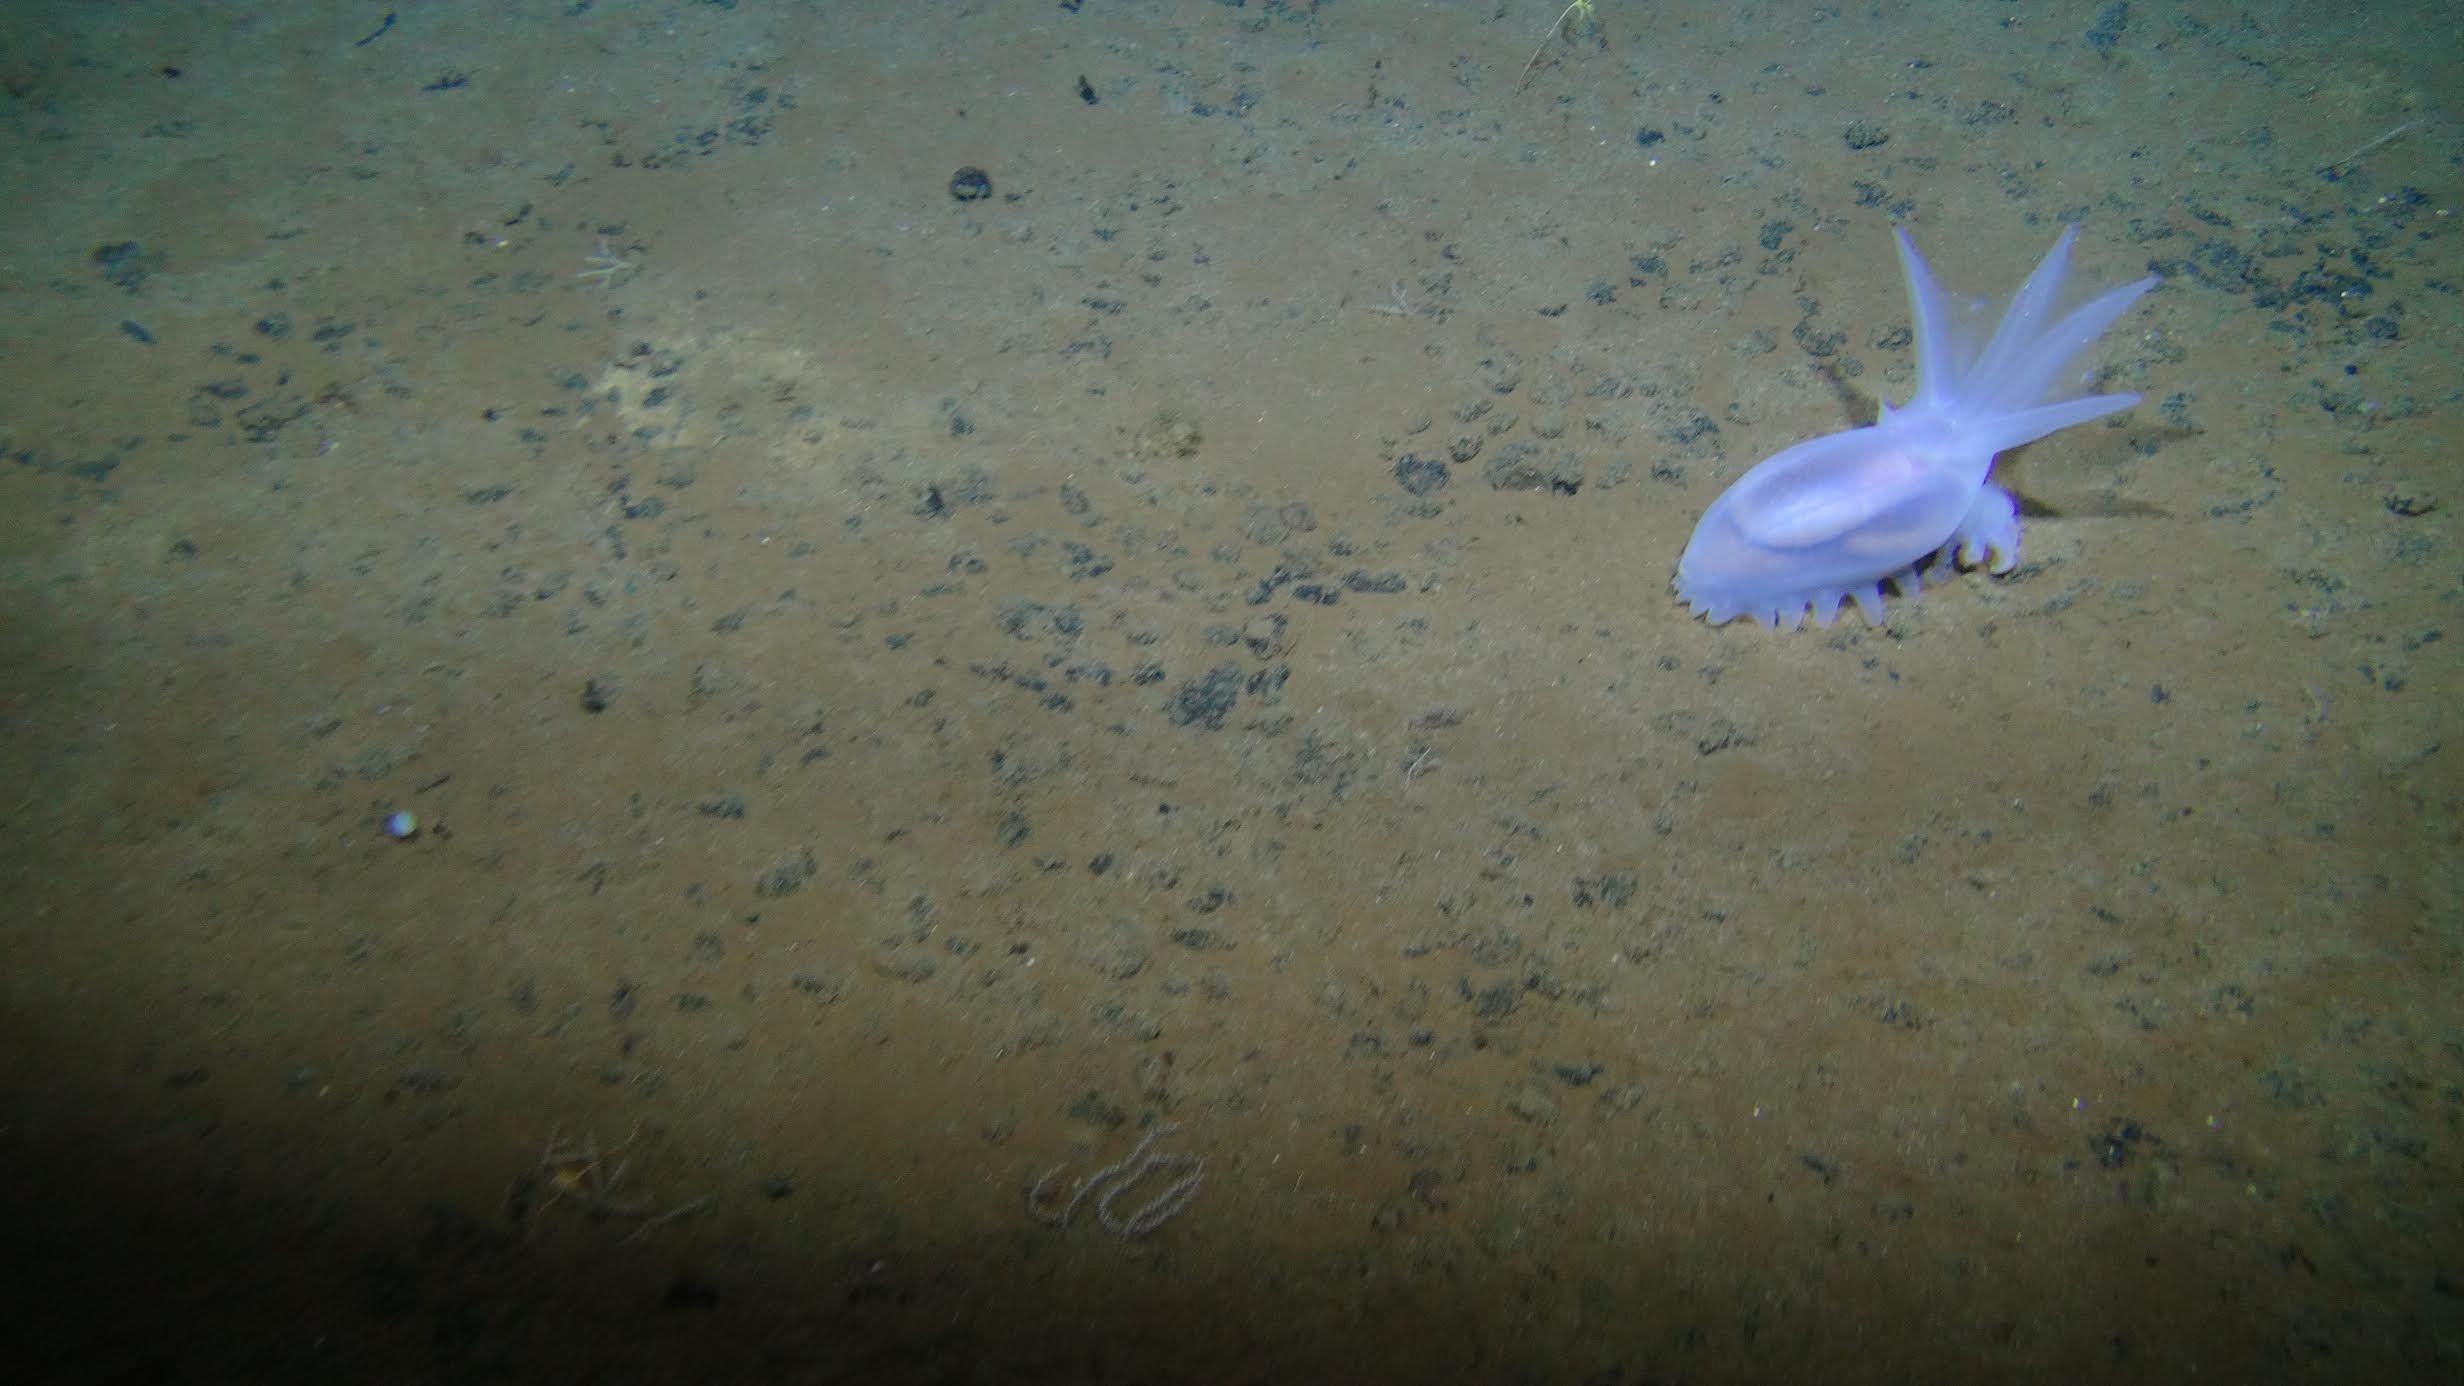 A purpley-blue sea cucumber is seen on the ocean seafloor covered in metallic nodules. Deep sea mining companies are after these nodules as a source of metals for batteries